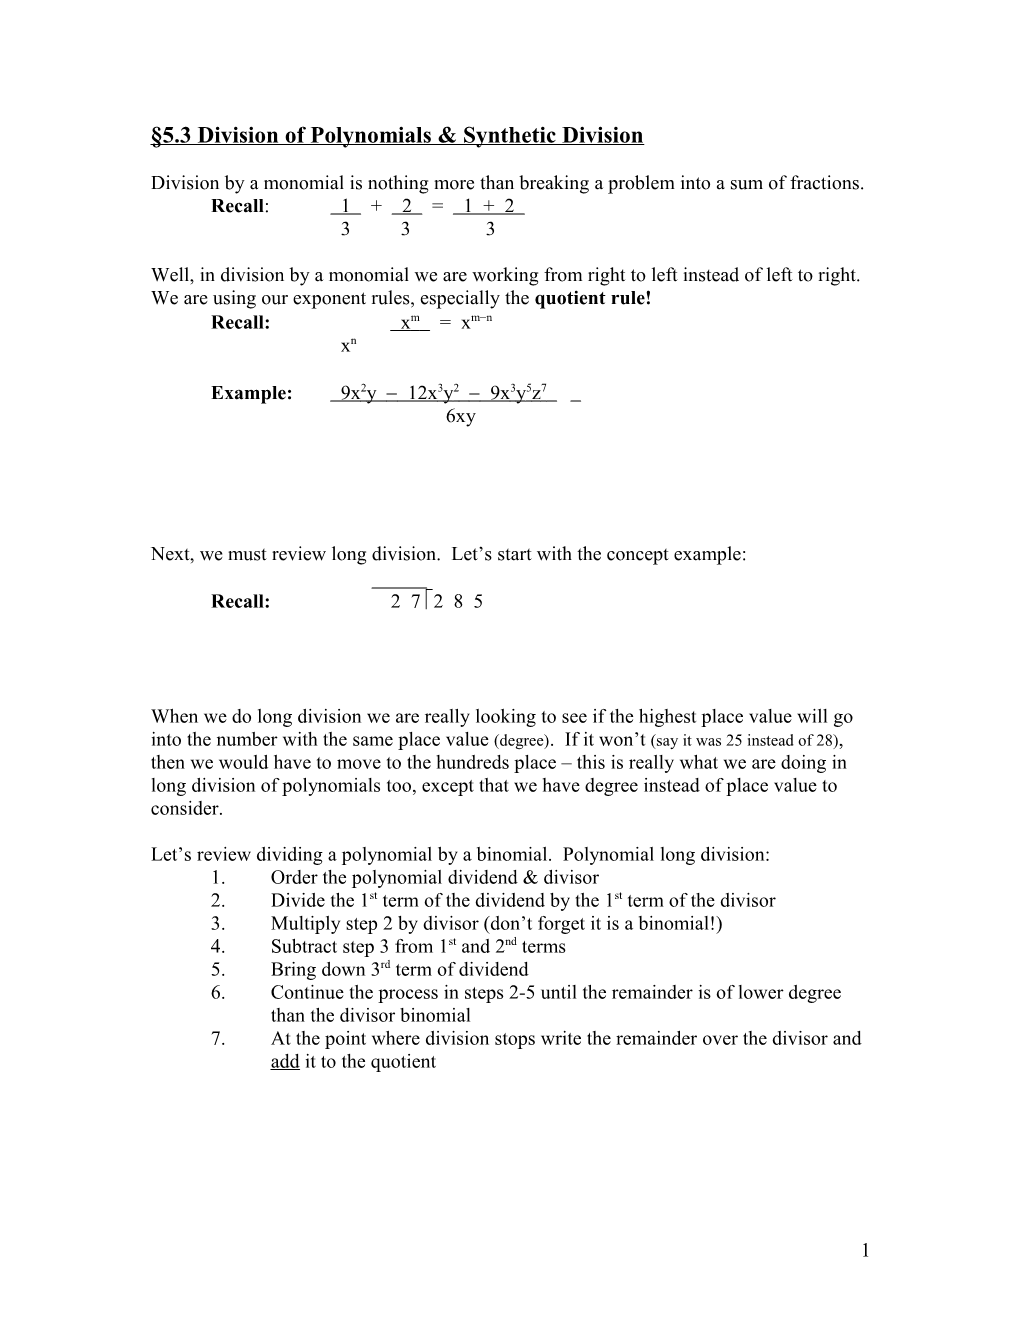 5.3 Division of Polynomials & Synthetic Division